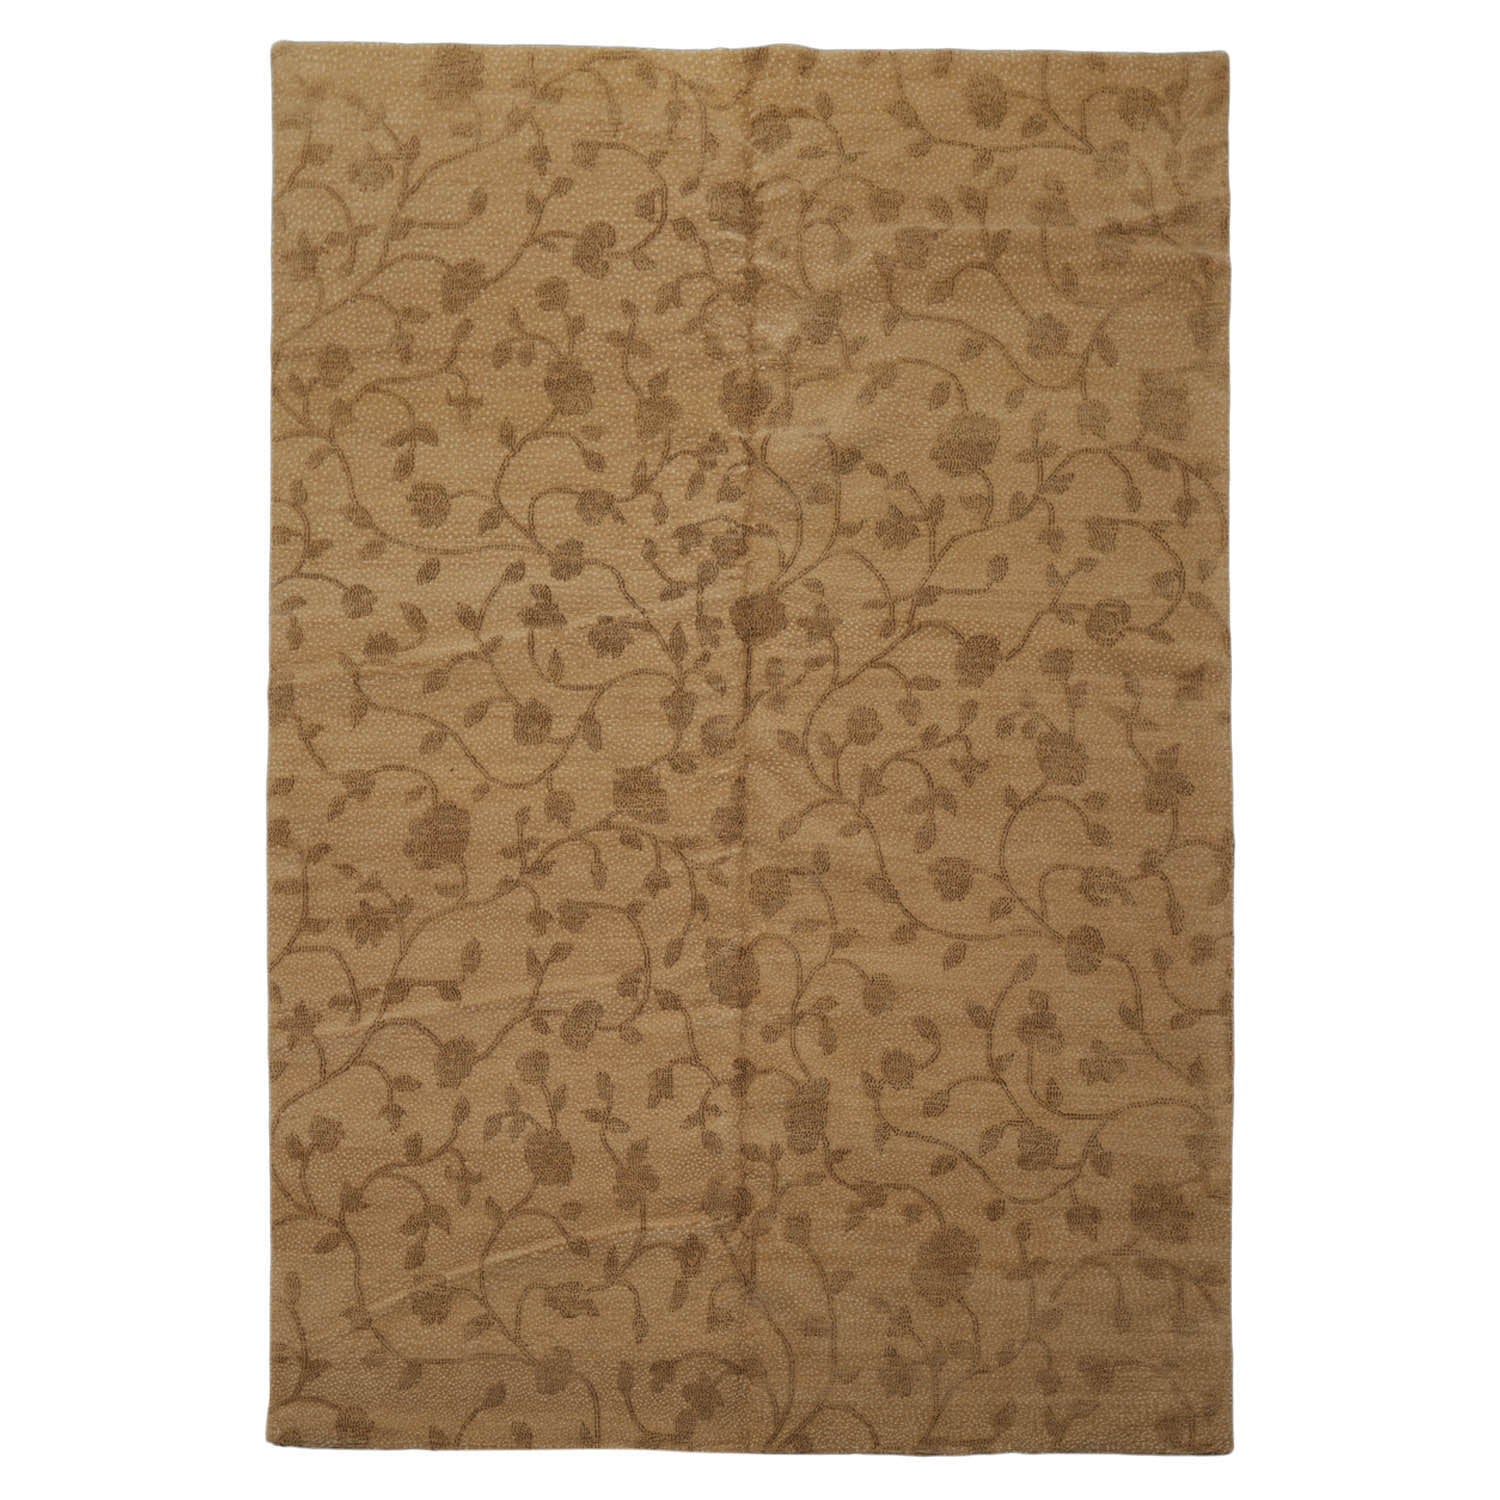 Galit 6x9 Hand Knotted Tibetan 100% Wool Lapchi Transitional Oriental Area Rug Camel, Brown Color